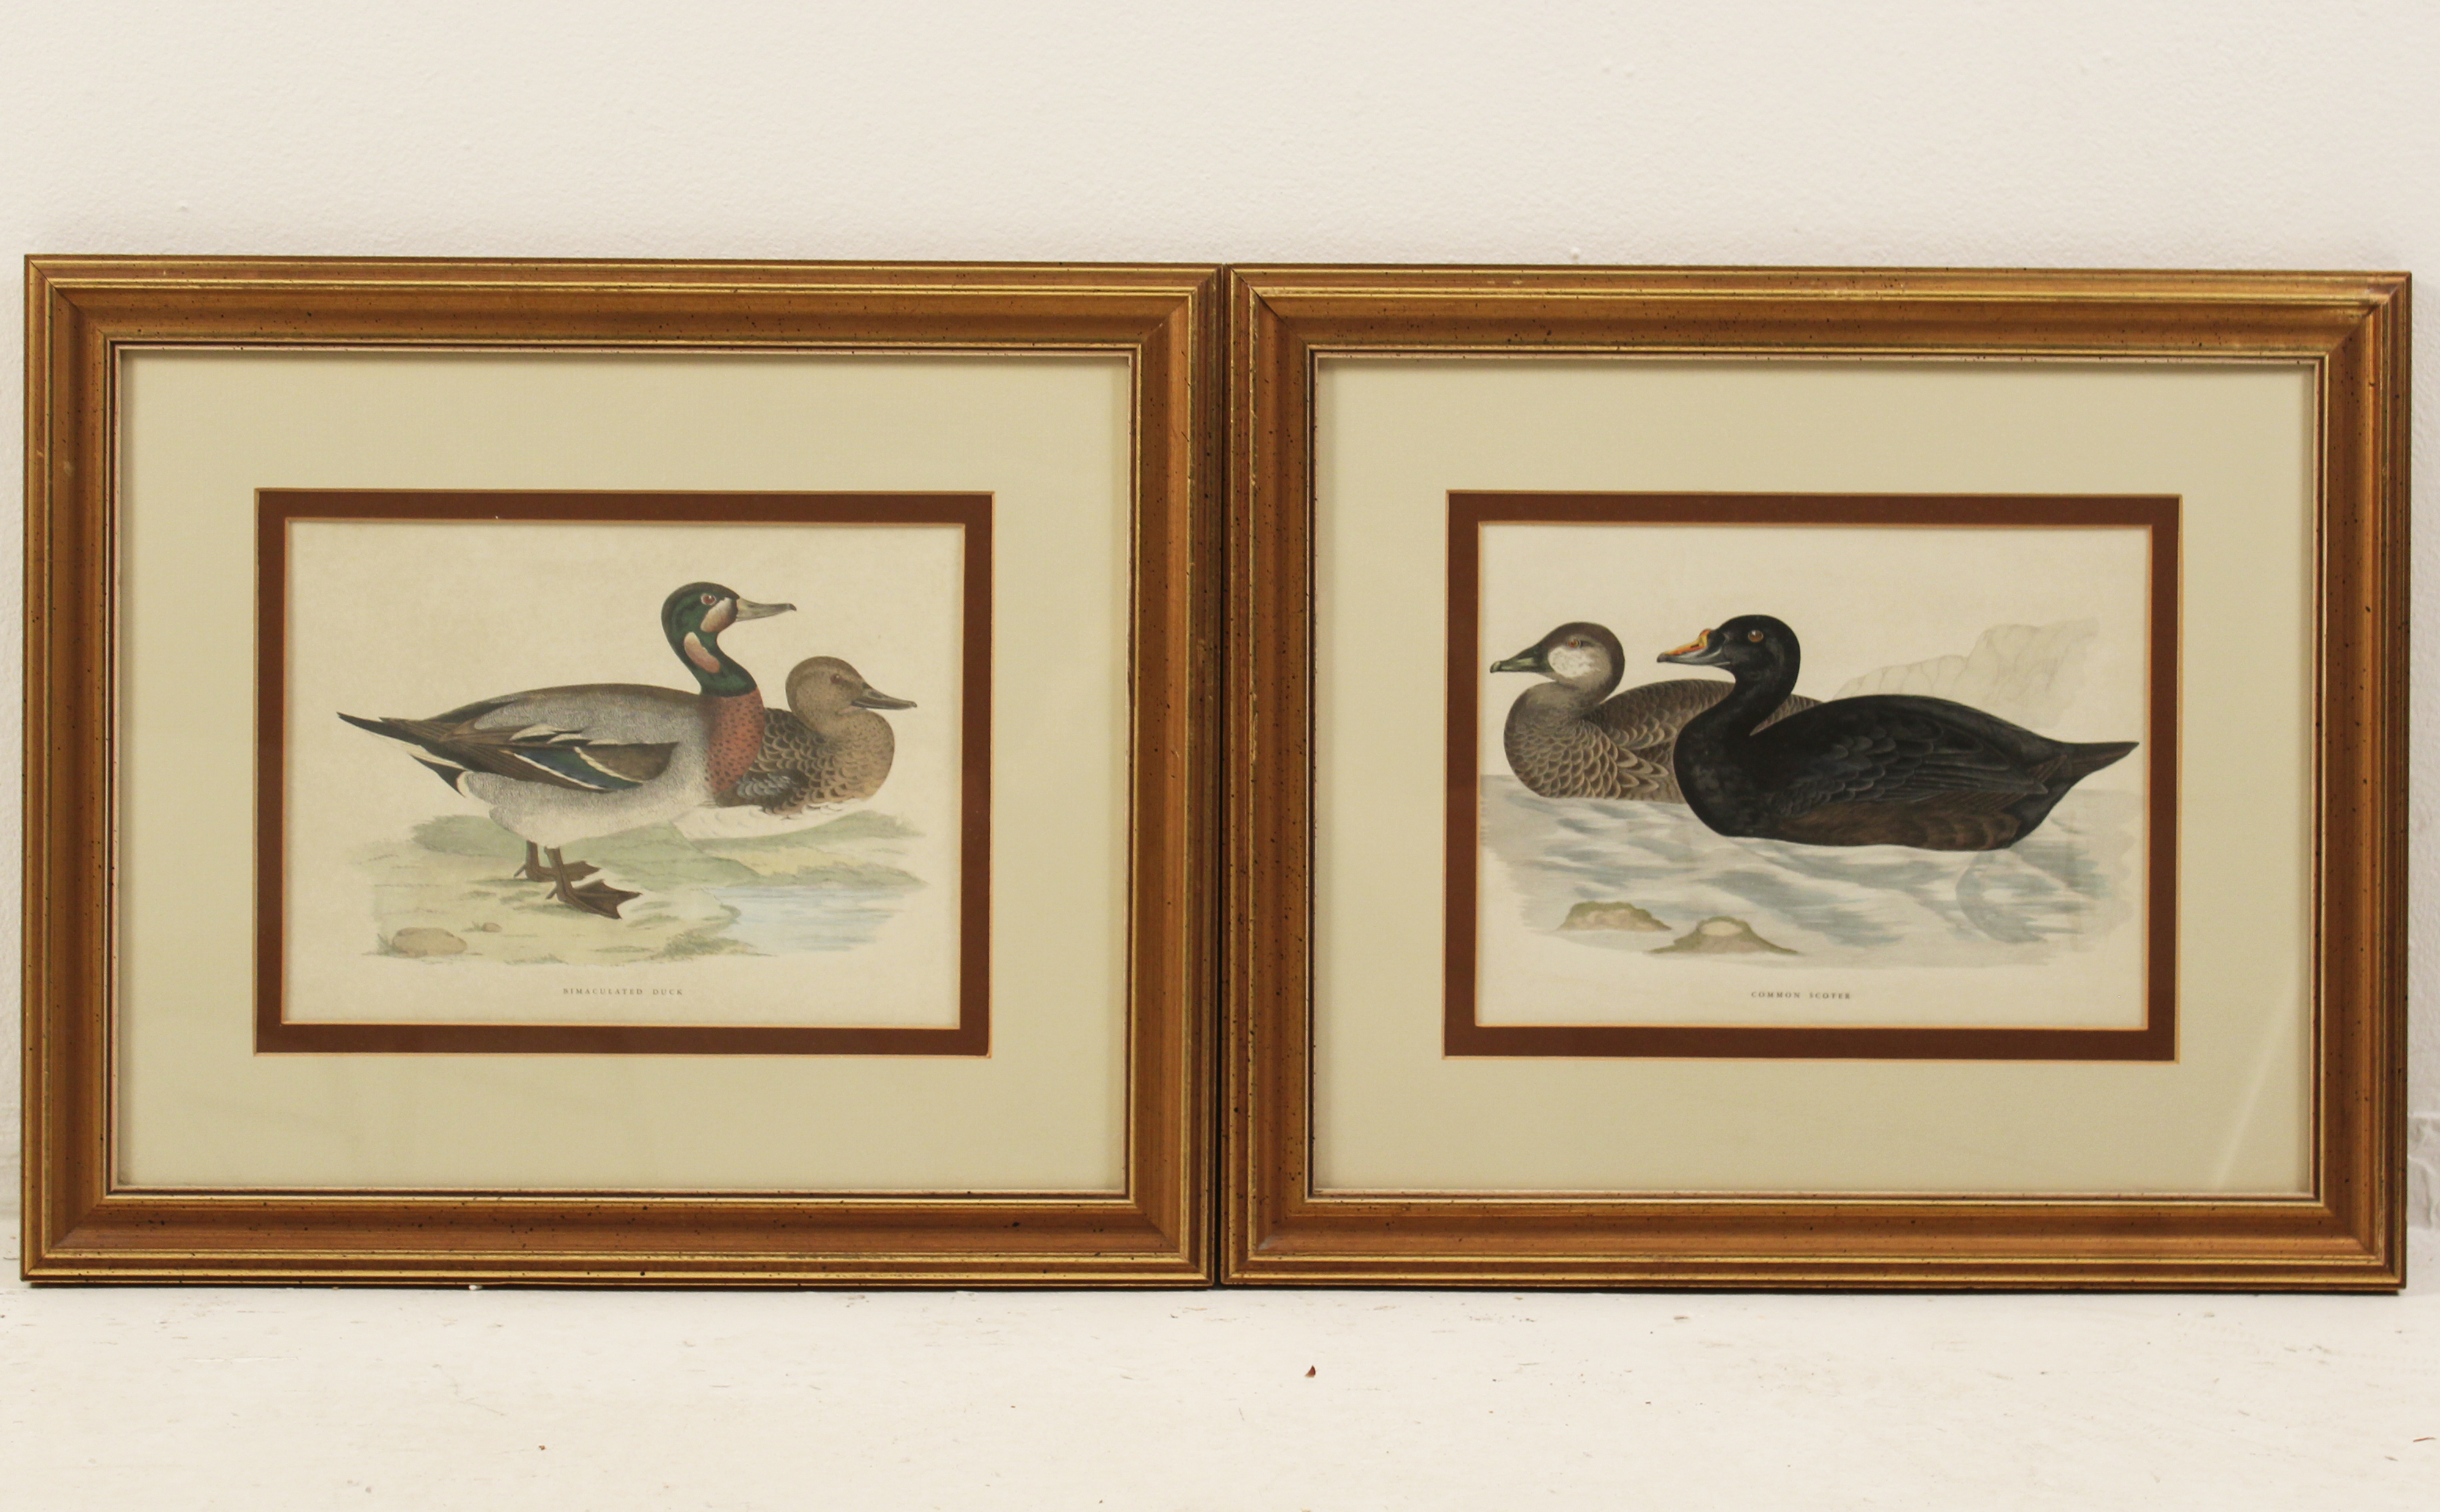 PAIR OF COLOR LITHOGRAPHS OF DUCKS PAIR